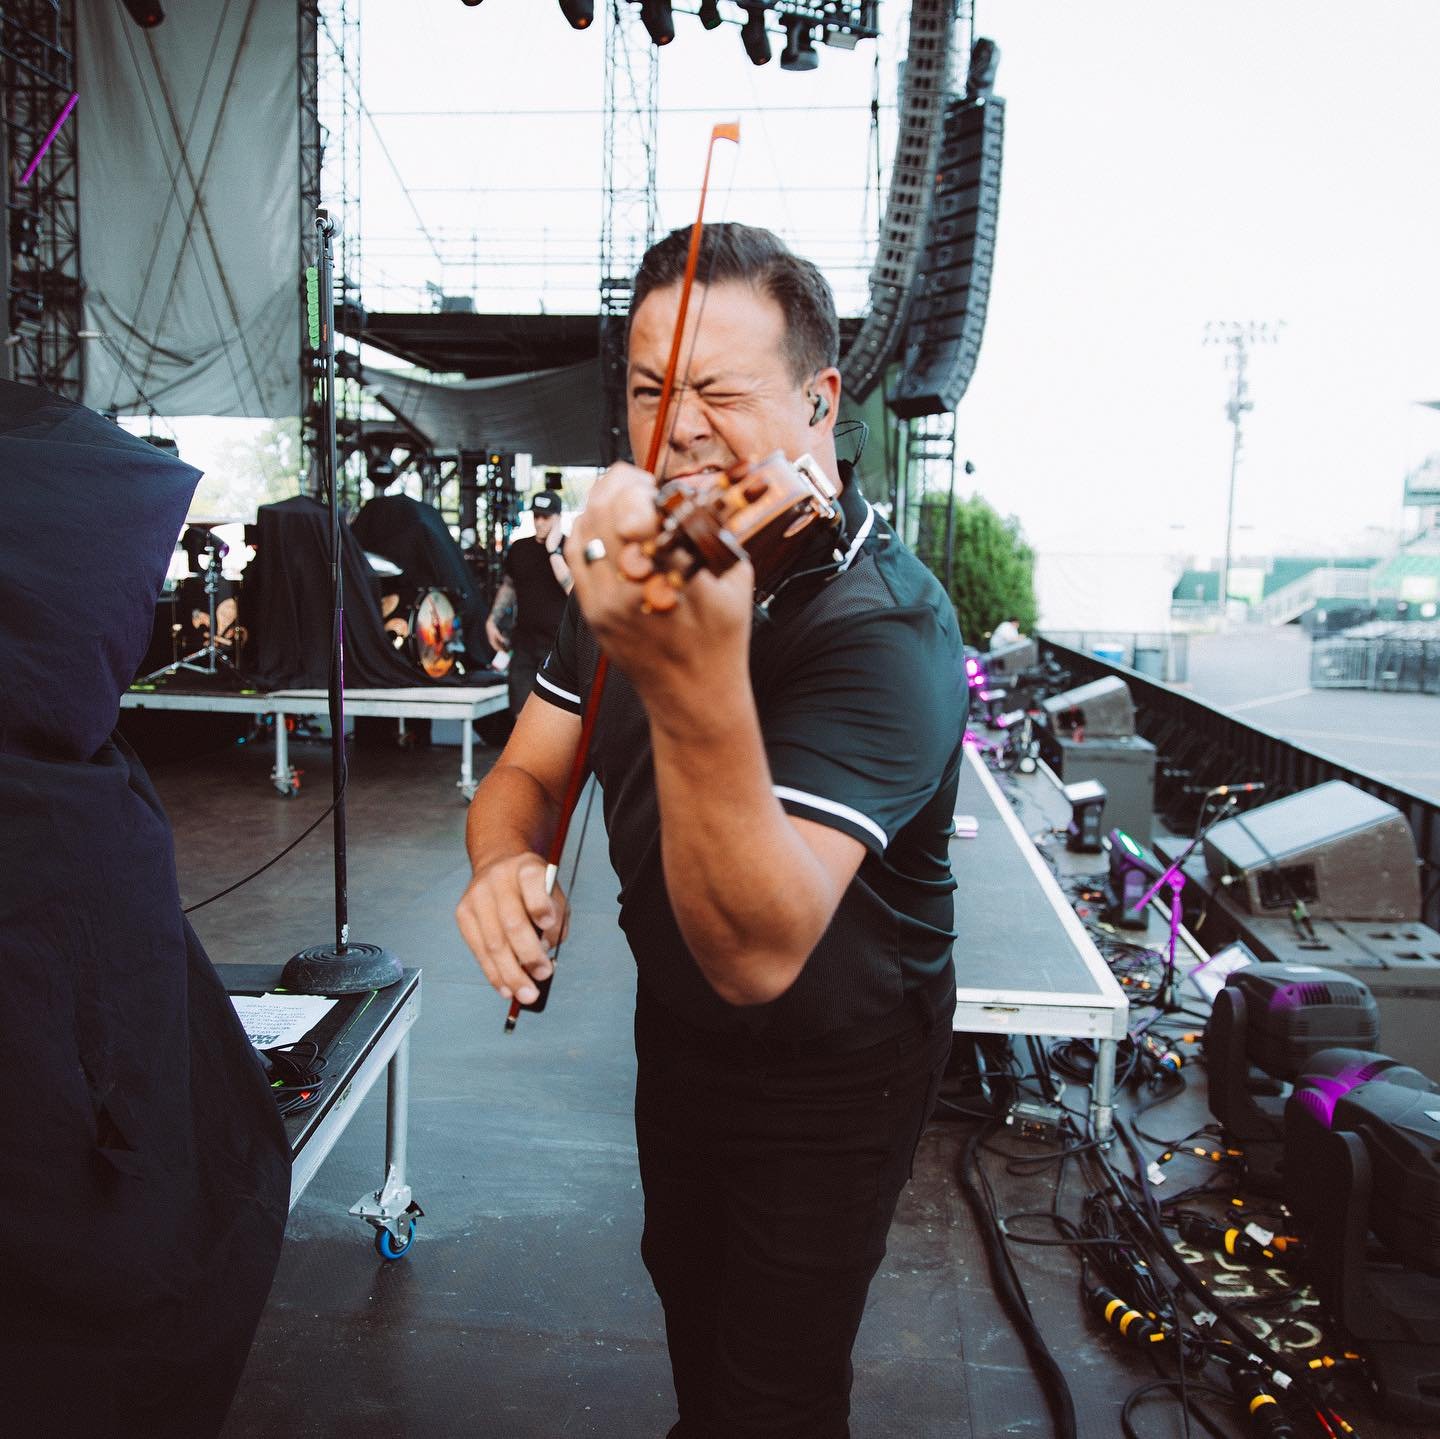 A few snaps from Chicago last year. We&rsquo;ll be back in town on June 28 at @huntingtonbankpavilion with Third Eye Blind! 
&bull;
&bull;
&bull;
📸 @acaciaevans 
#yellowcard #yellowcardband #poppunk #emo #candidphotography #behindthescenes #chicago